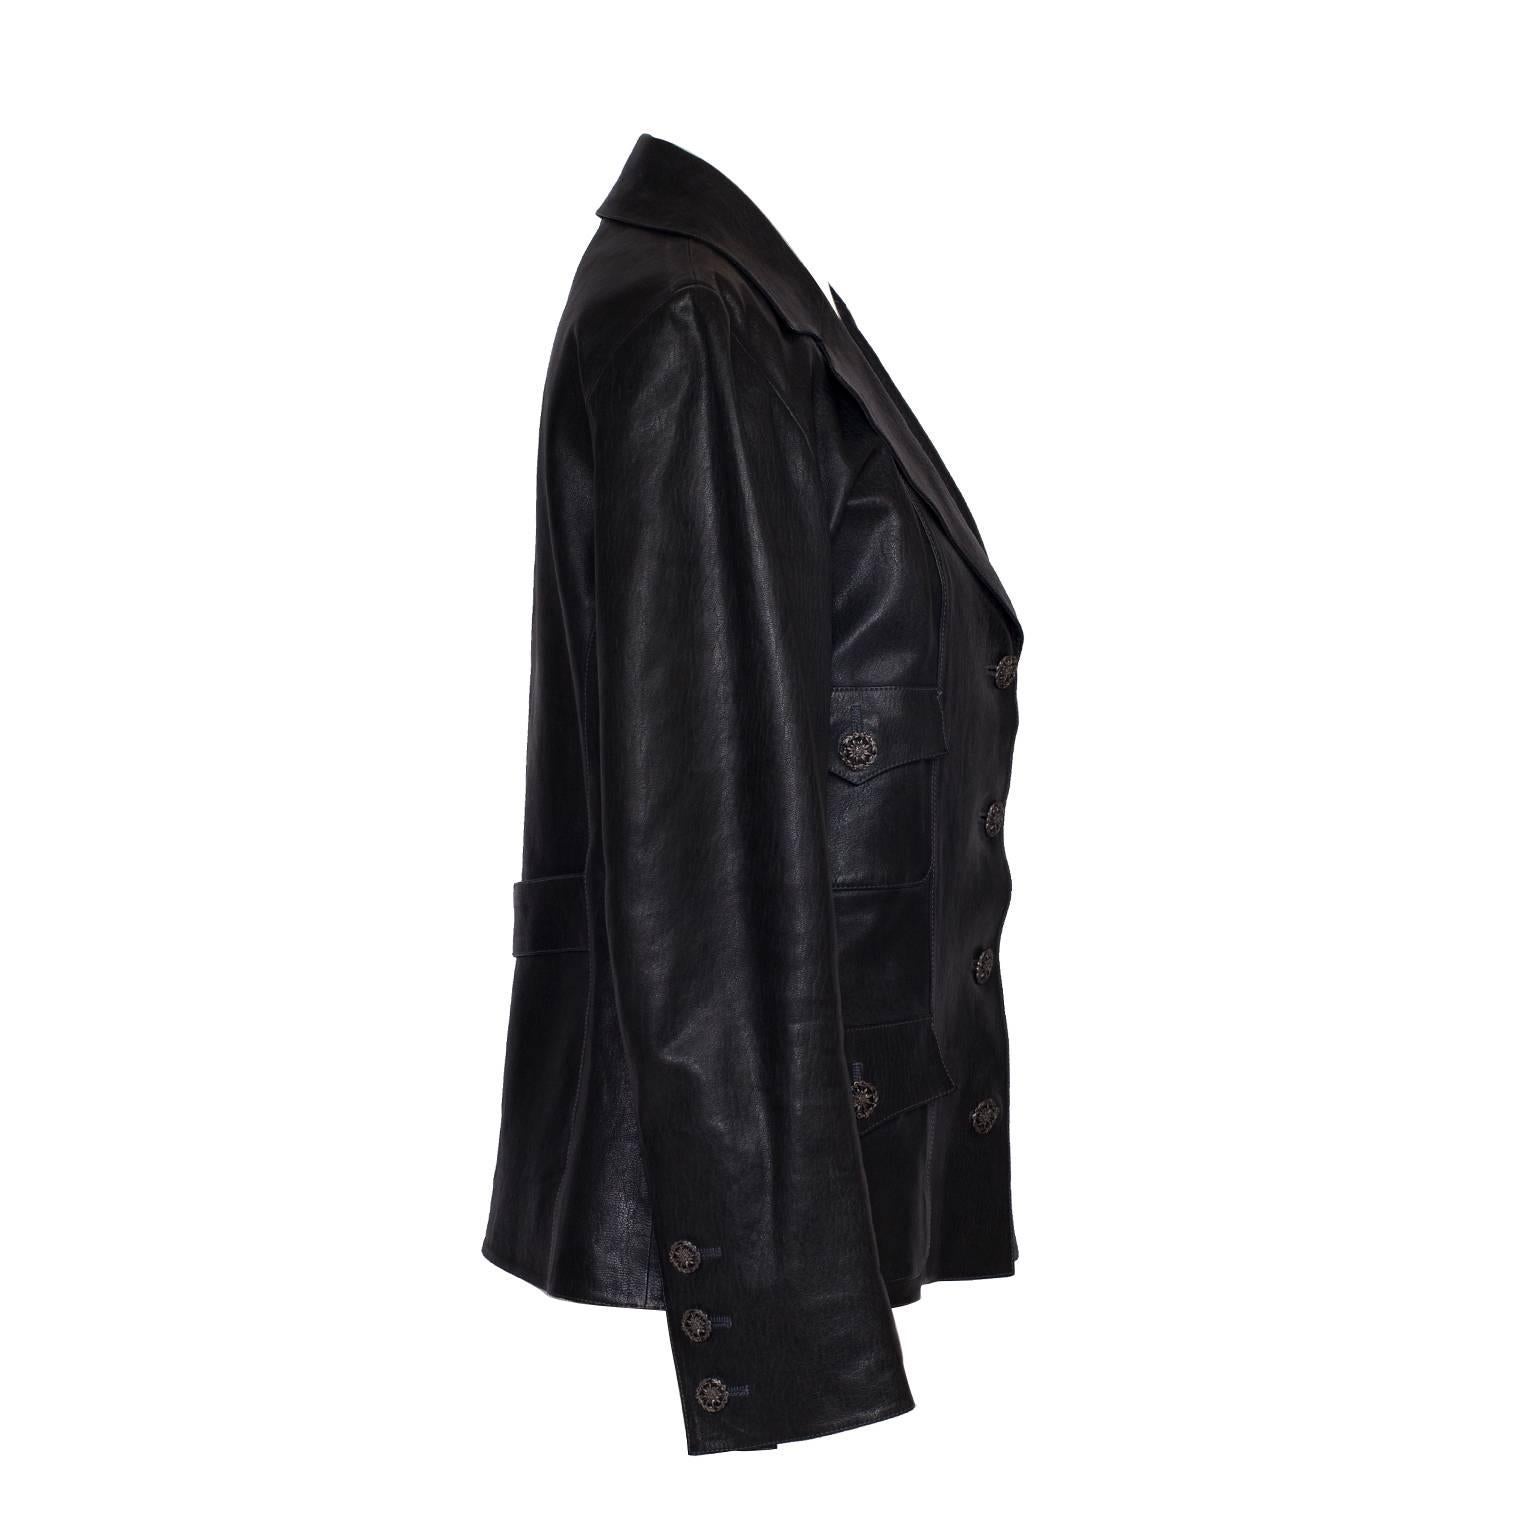 Classic Chanel black jacket in lam skin leather with silk lining.
Made in France.
Shoulder to shoulder - 38cm
Length from center back neck point to hem -  56.5cm
Sleeve - 57cm